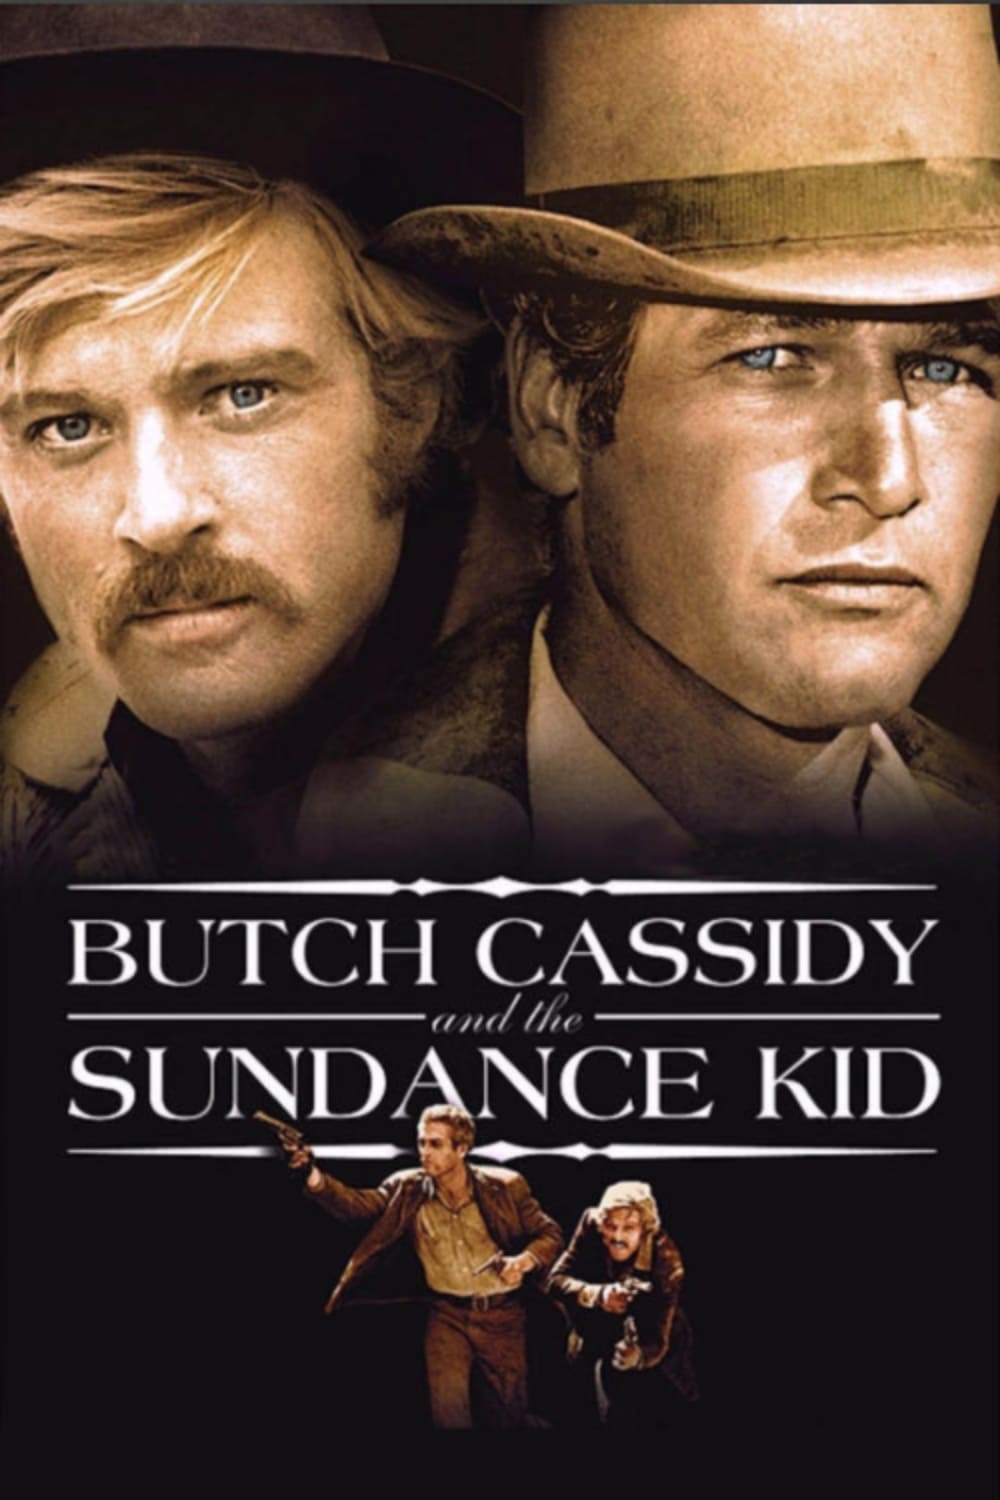 Butch Cassidy and the Sundance Kid - the First Ten Minutes - thescriptblog.com